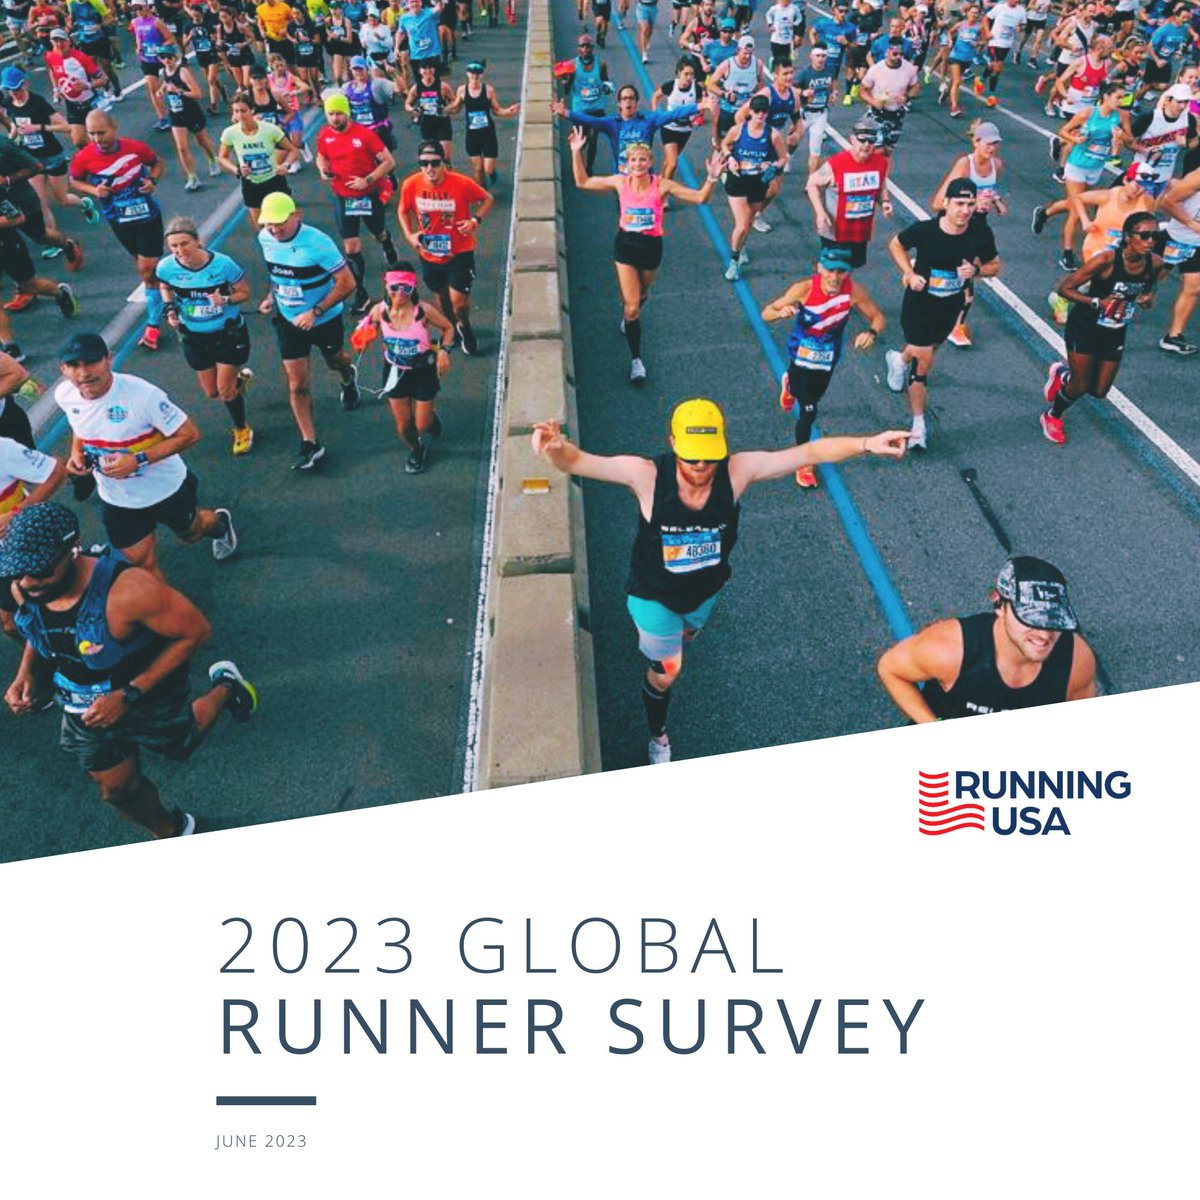 Calling all runners! The Global Runner Survey from Running USA is now accepting responses. Share your thoughts today and help make races better for all. Take the 2023 survey here: survey.alchemer.com/s3/7368158/NYC…